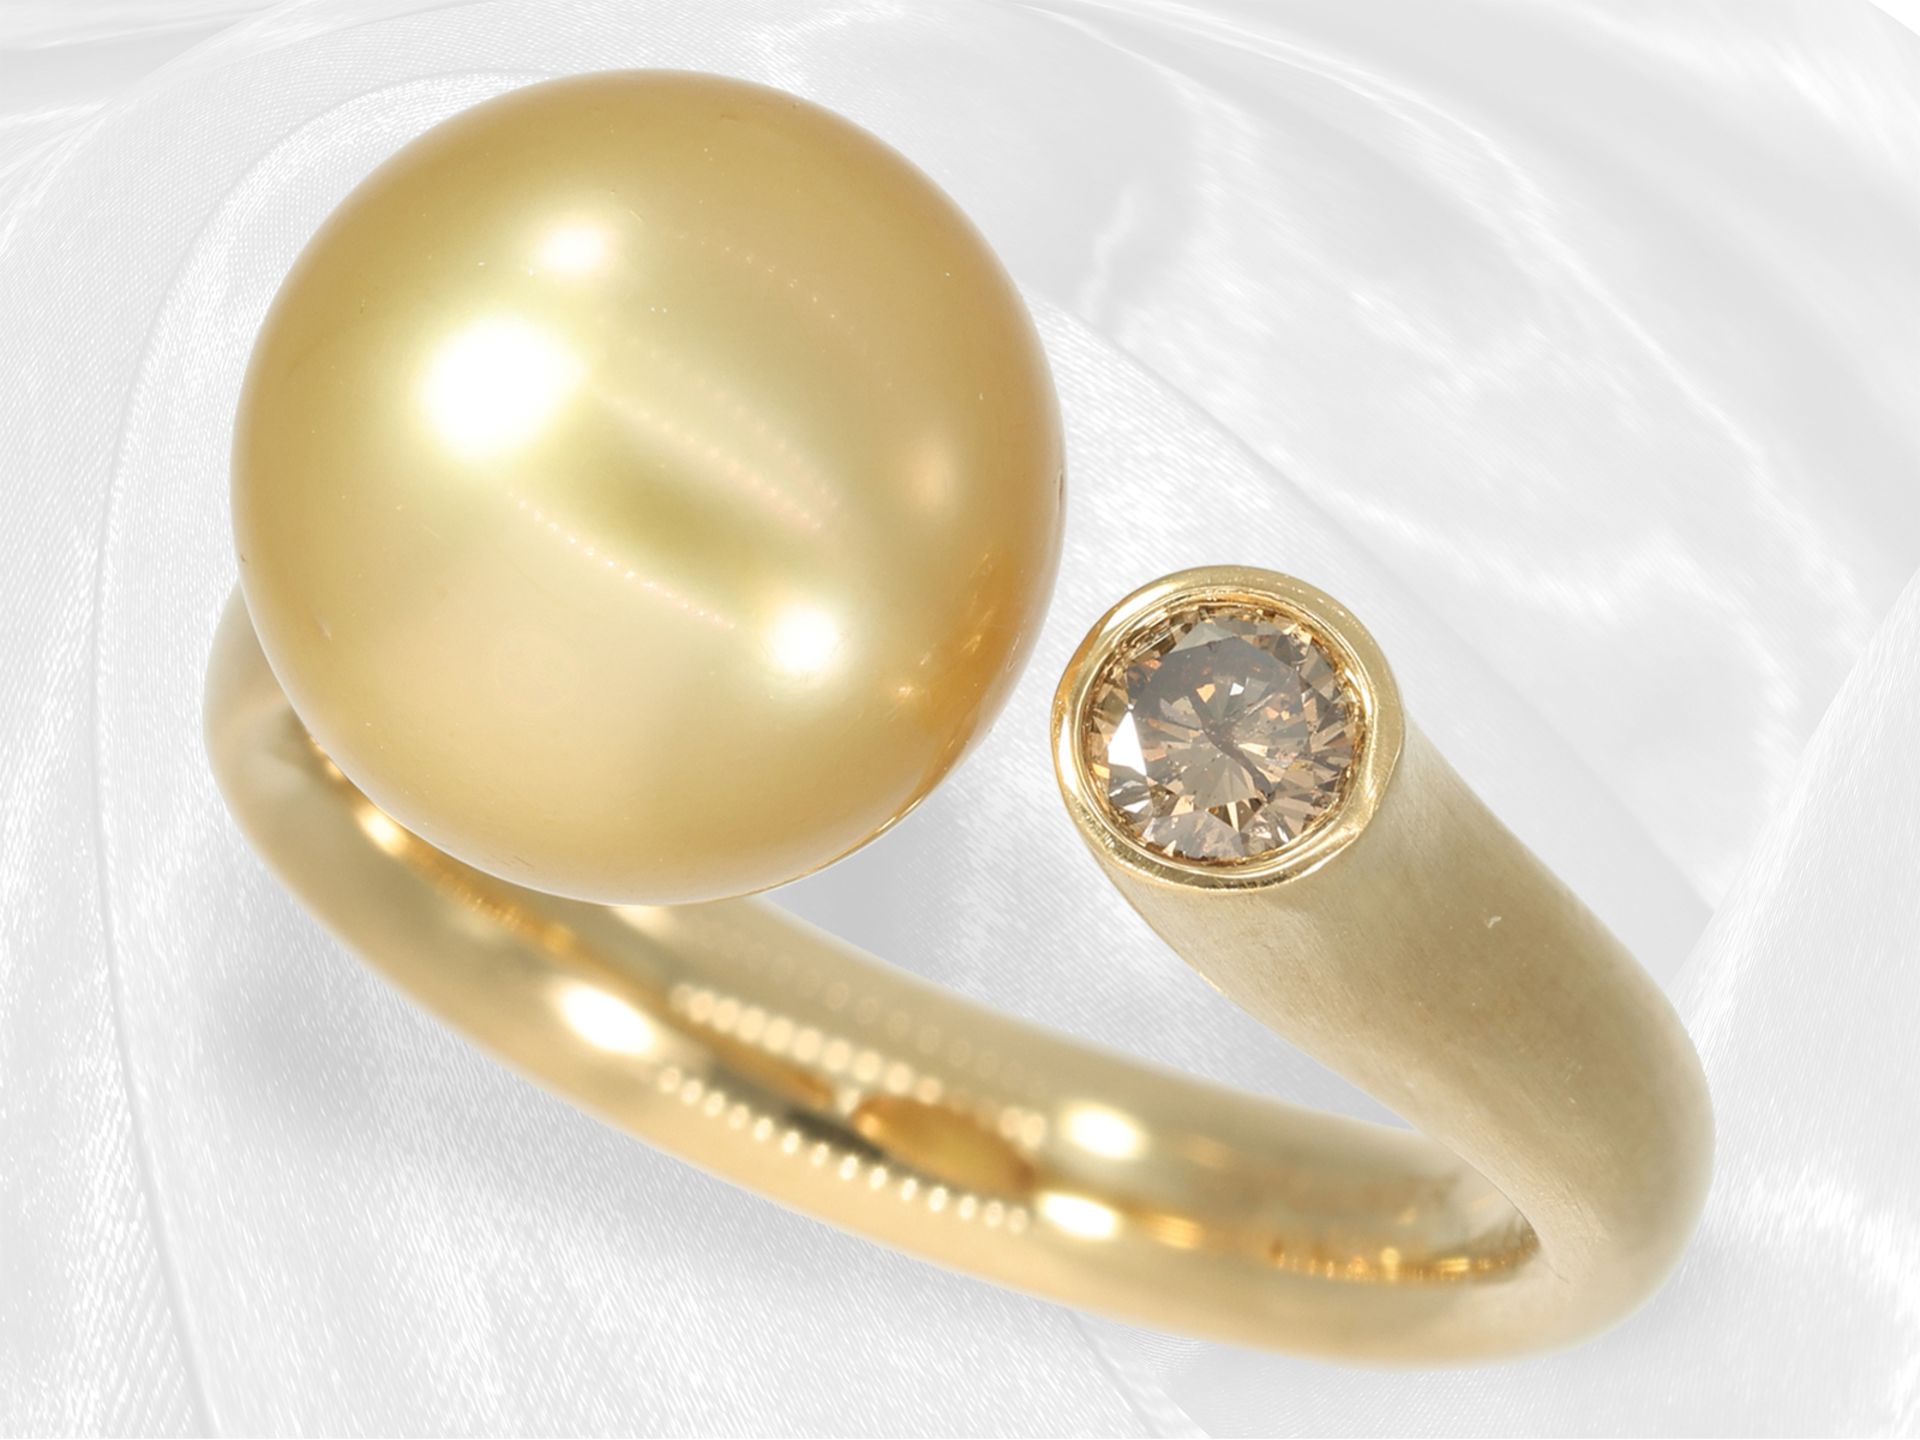 Elaborately crafted, high-quality designer ladies' ring with finest South Sea pearl and fancy diamon - Image 4 of 10